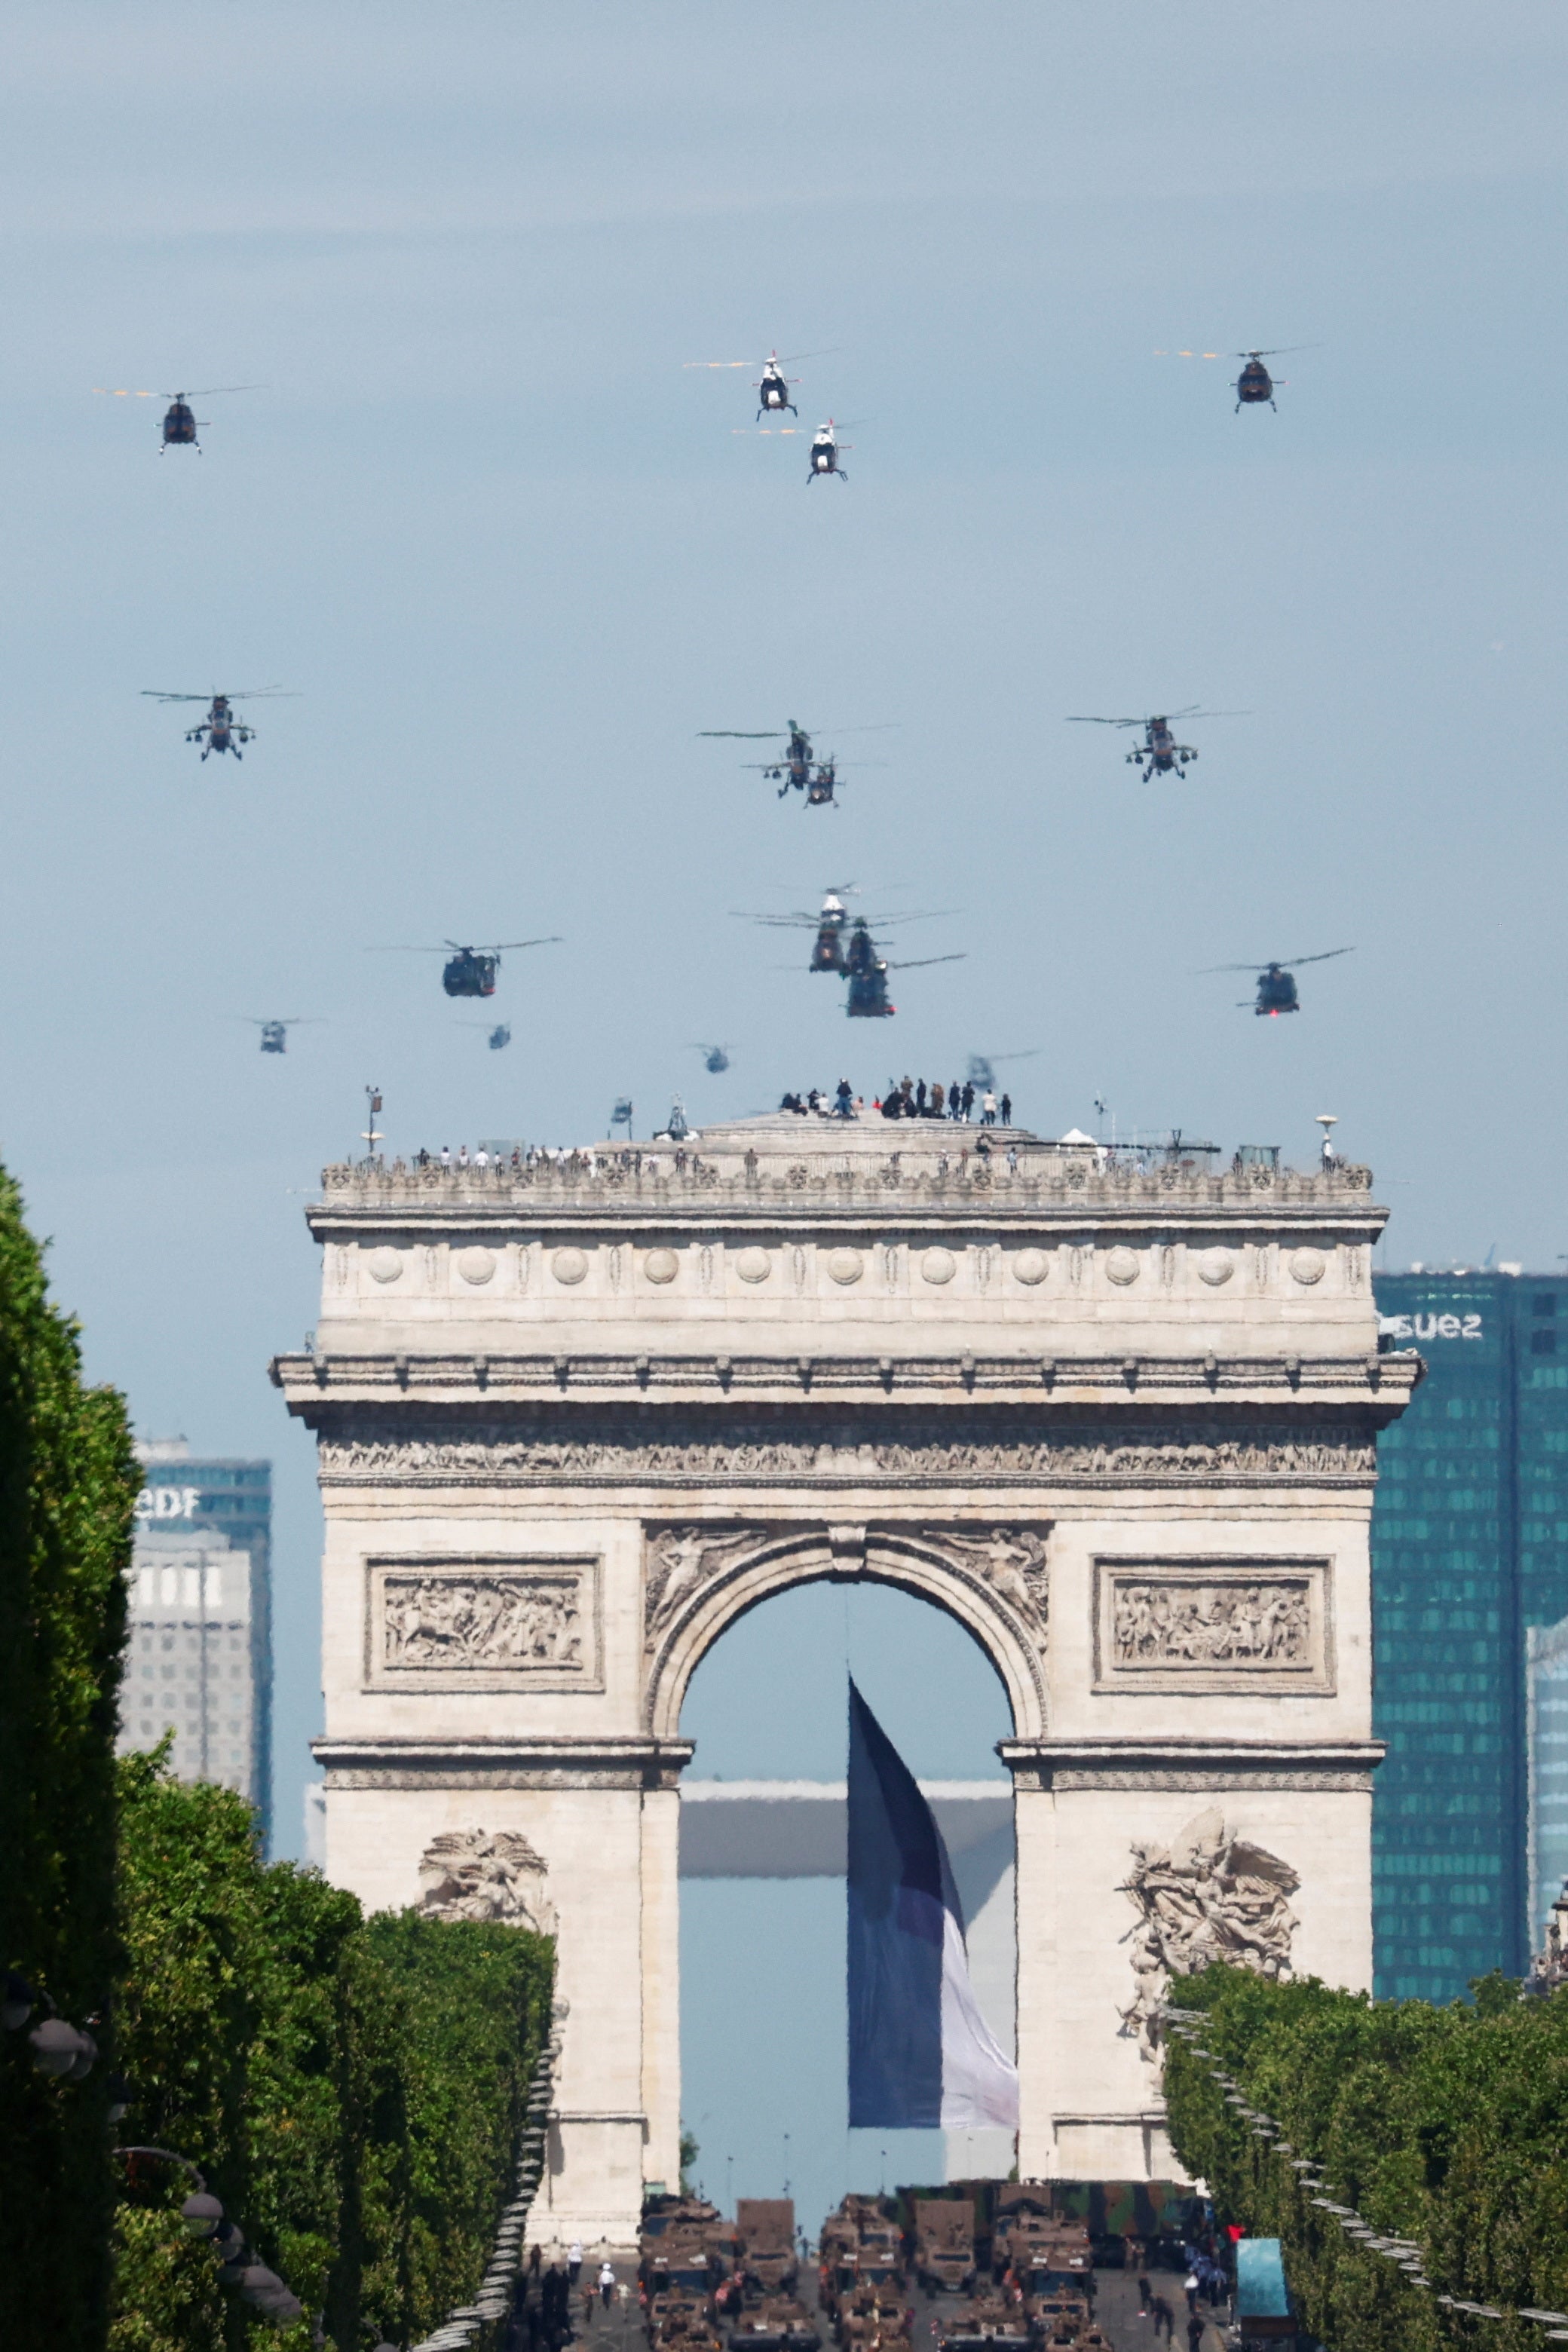 Helicopters fly over the Champs-Elysees Avenue during the annual Bastille Day military parade in Paris.